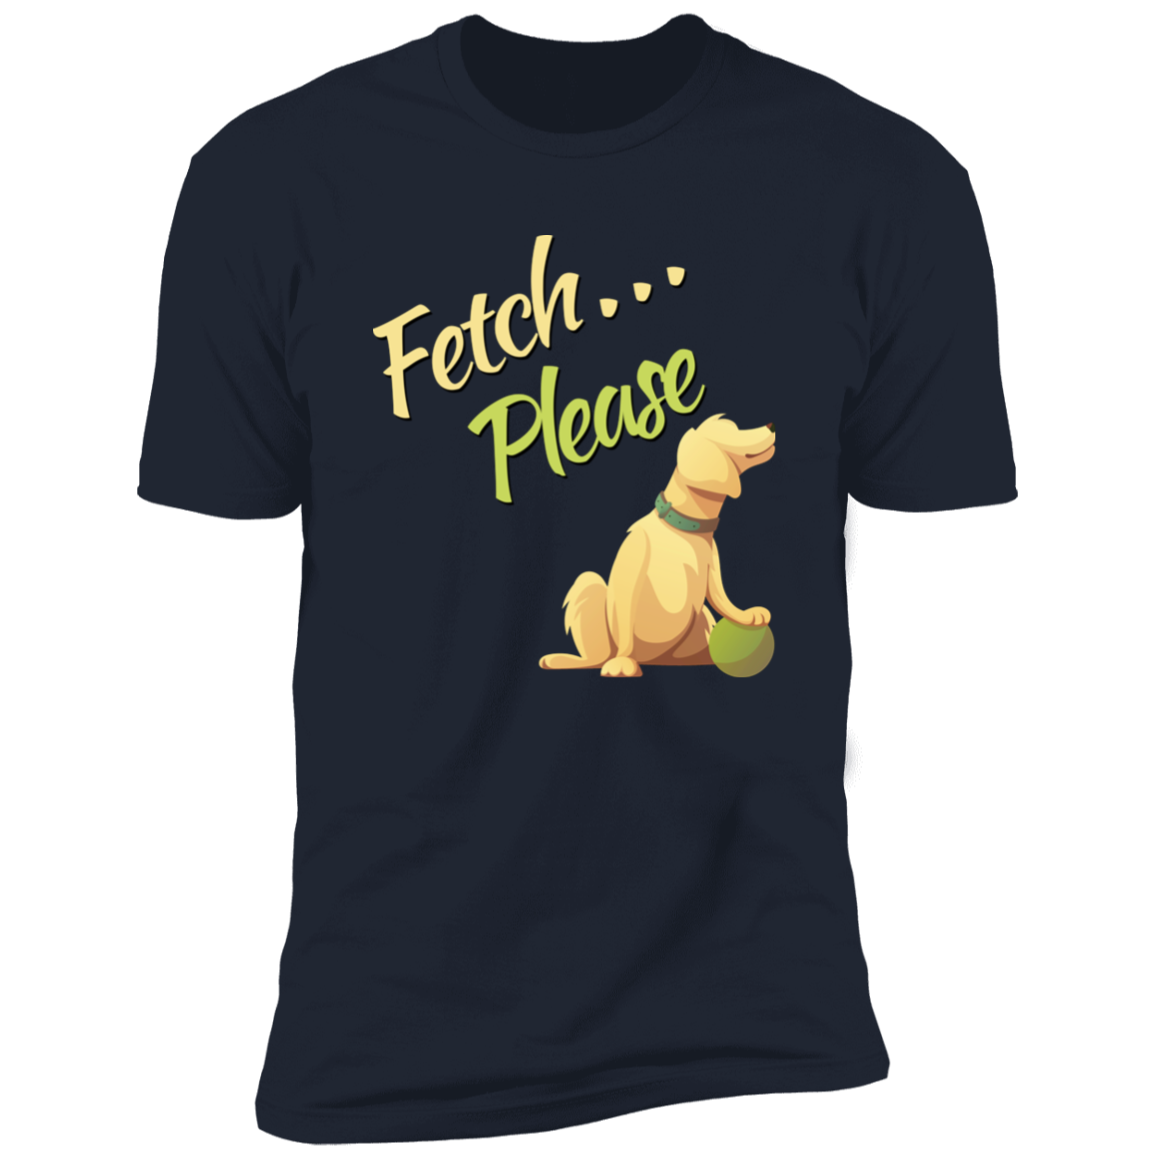 Fetch Please funny dog t-shirt, funny dog shirt for humans, in navy blue